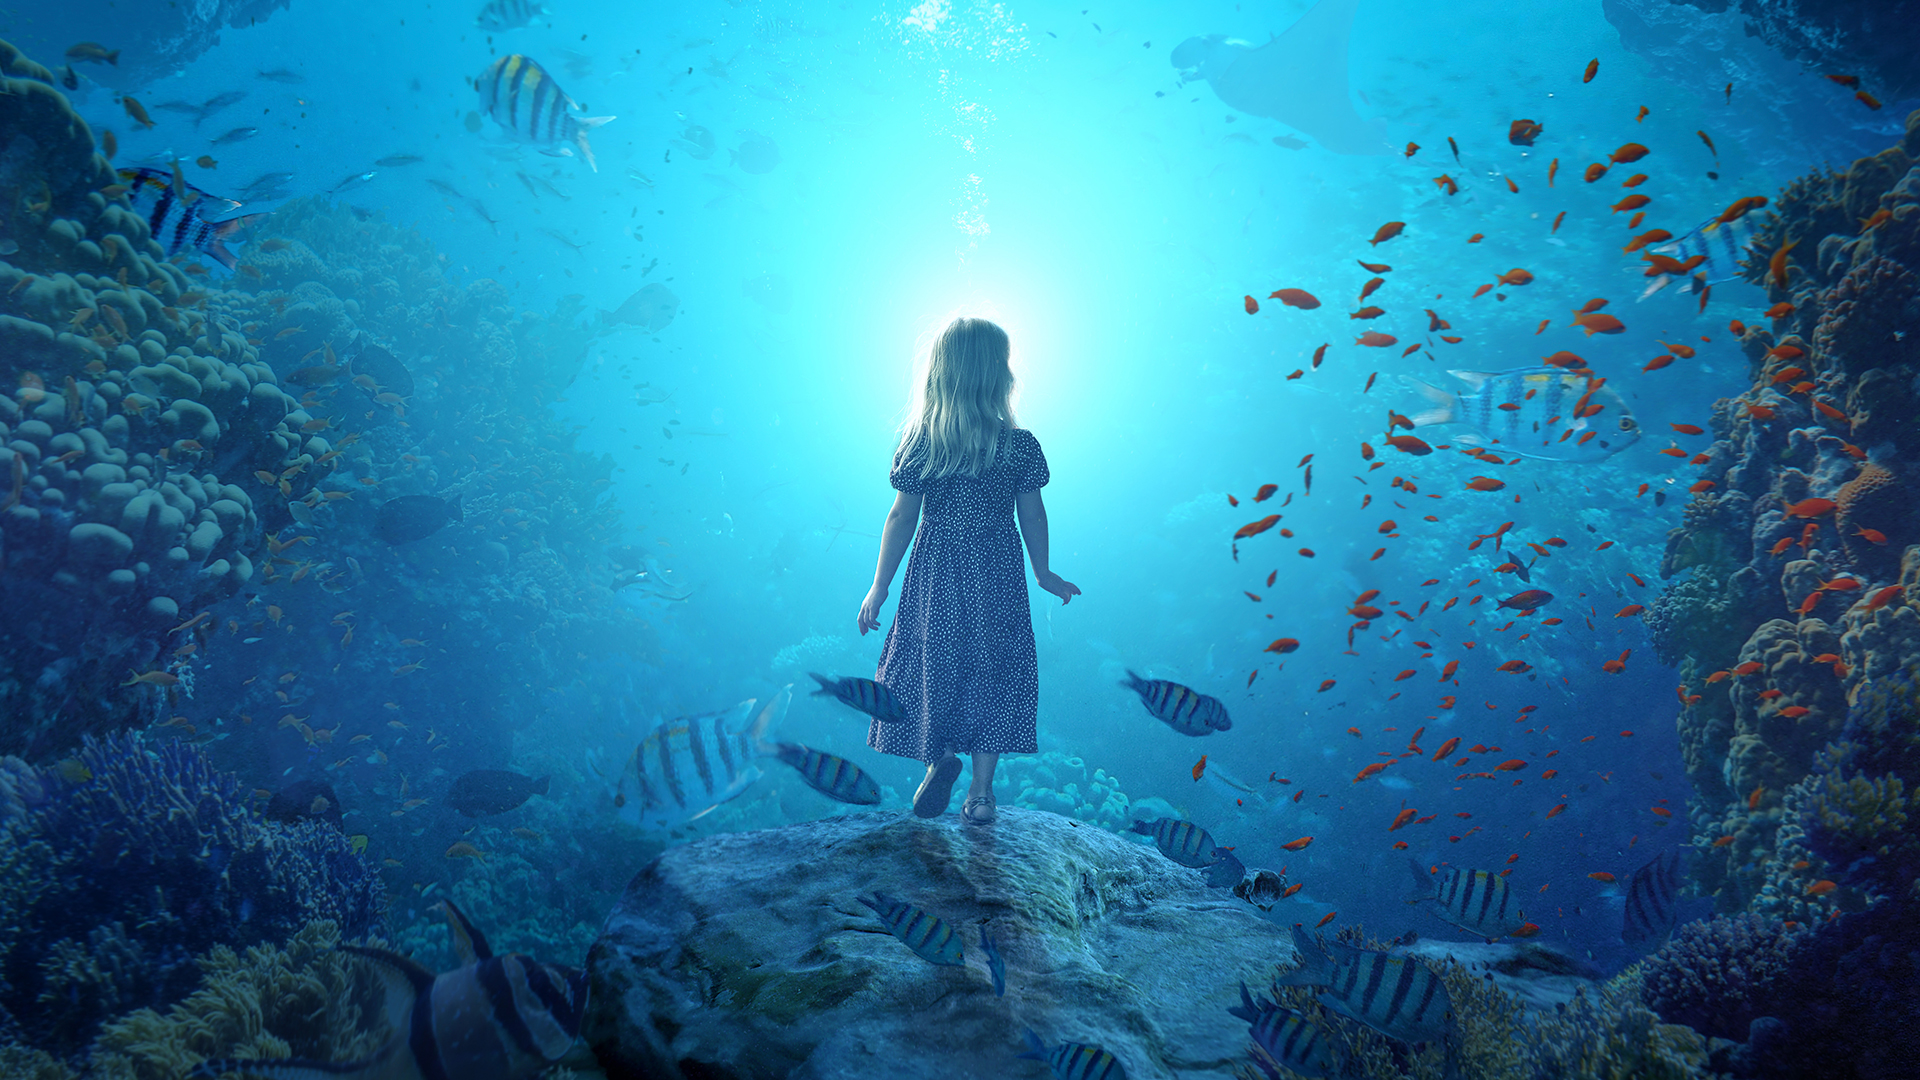 Conceptual Compositing: Creating and Animating an Underwater